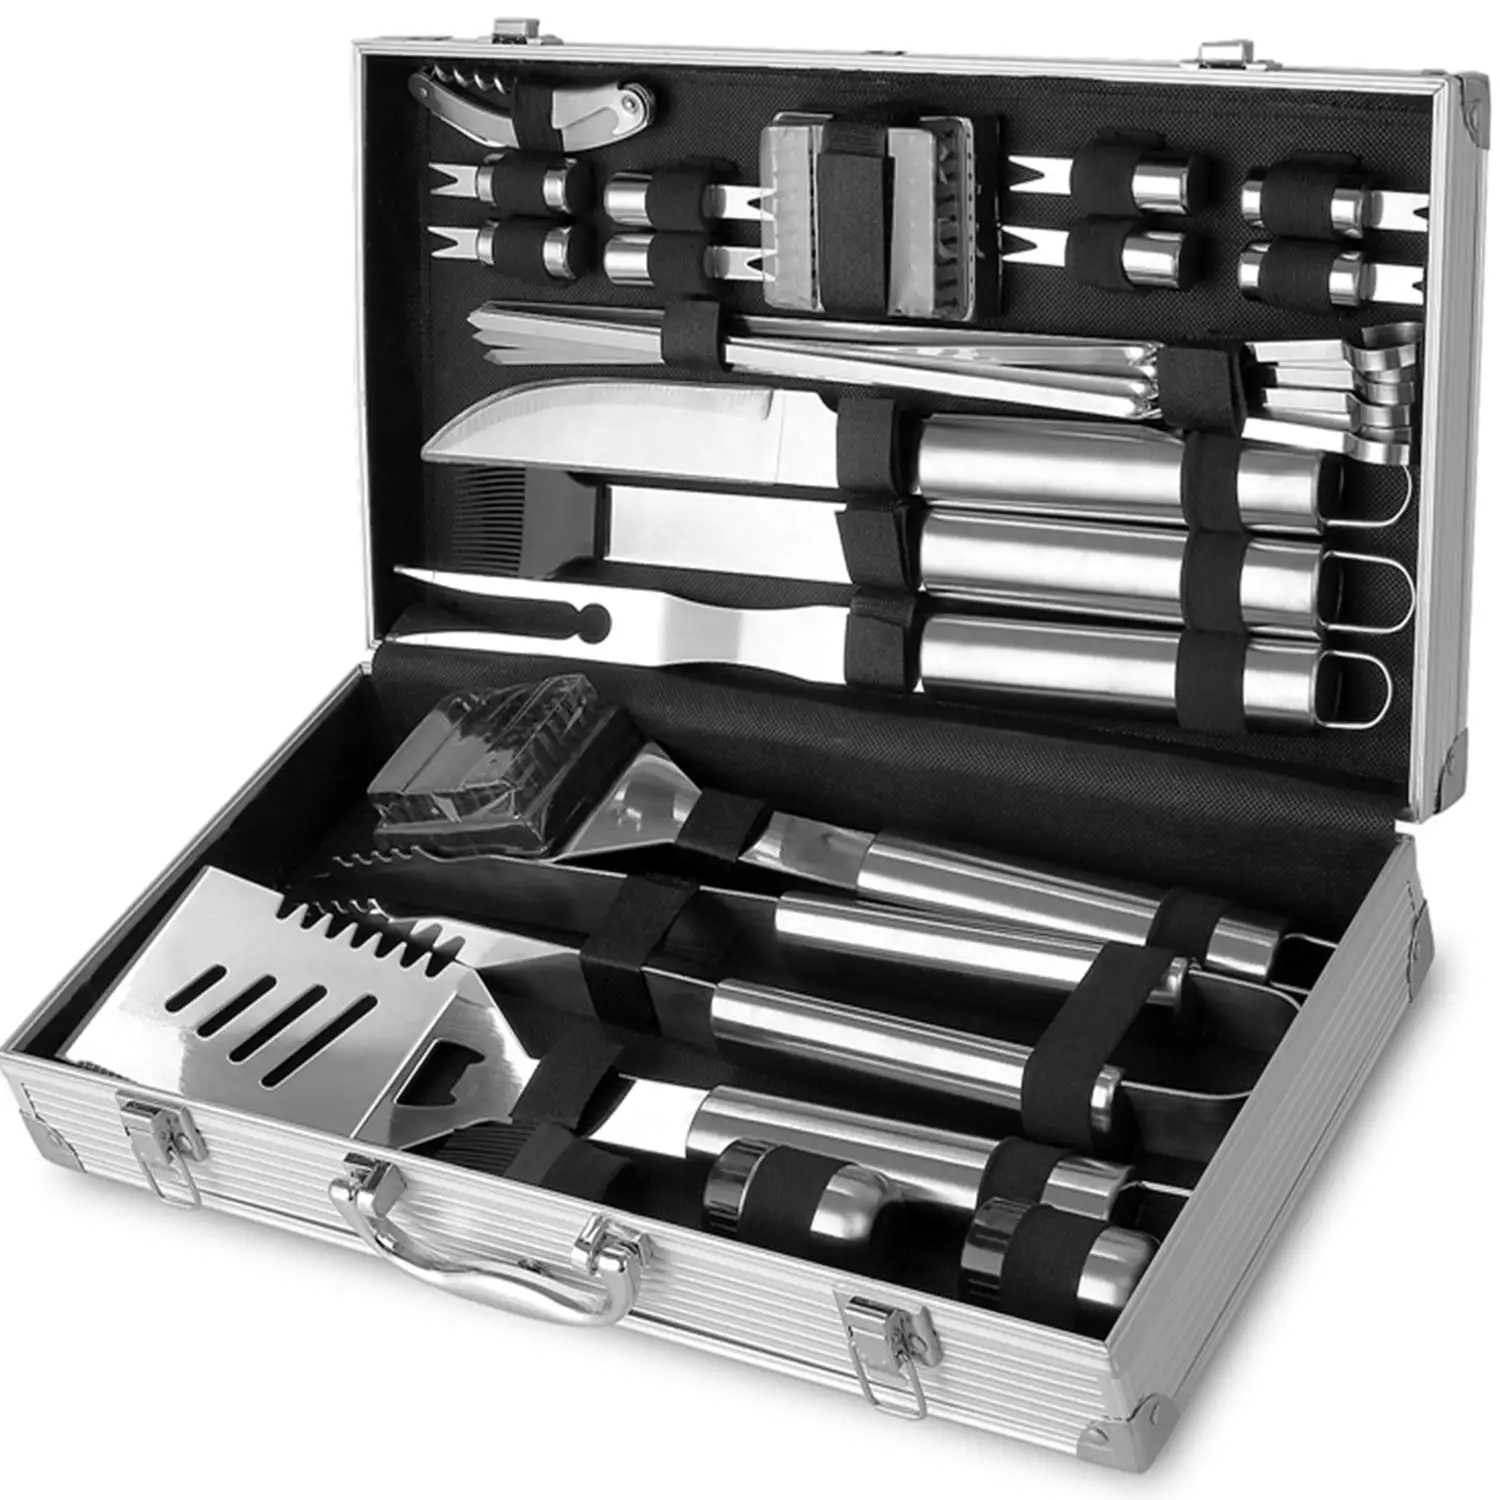 26PC BBQ SET & CASE BARBECUE UTENSIL TOOL CAMPING STAINLESS STEEL CUTLERY UK 